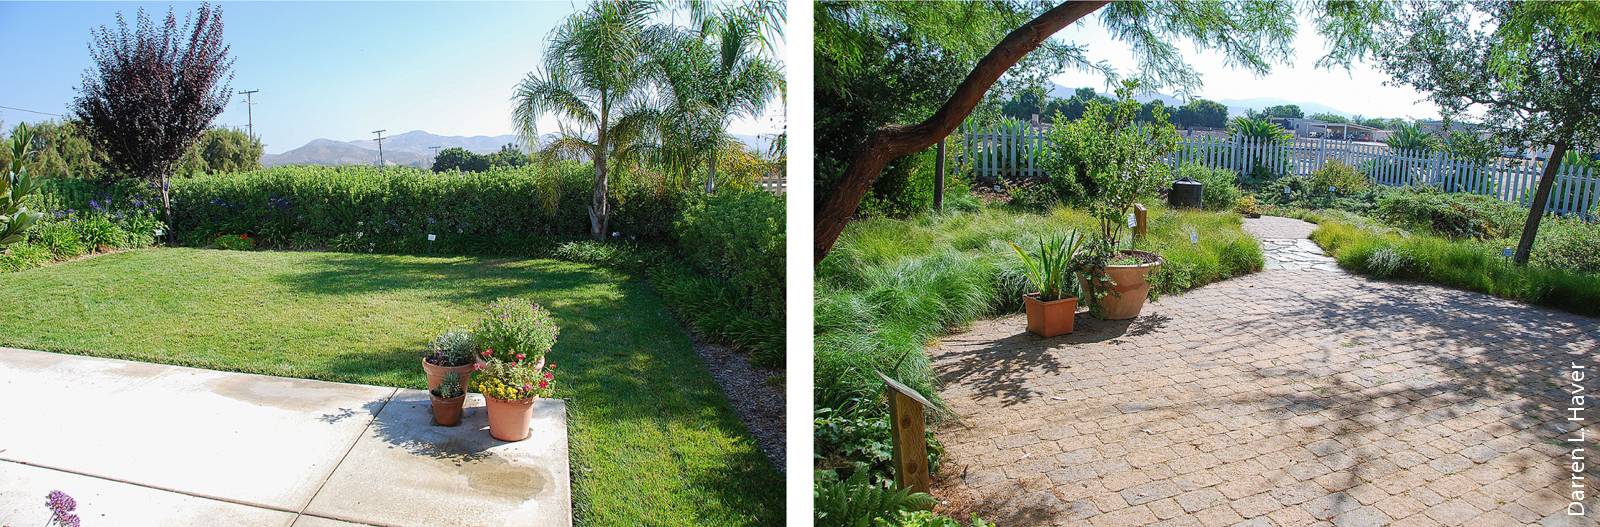 Home site A, left, represents a typical California yard. By contrast, Site C, right, incorporates a variety of features that save water and reduce runoff: native Southern California plants (including the lawn), permeable paving and a smart irrigation controller that responds to weather conditions.